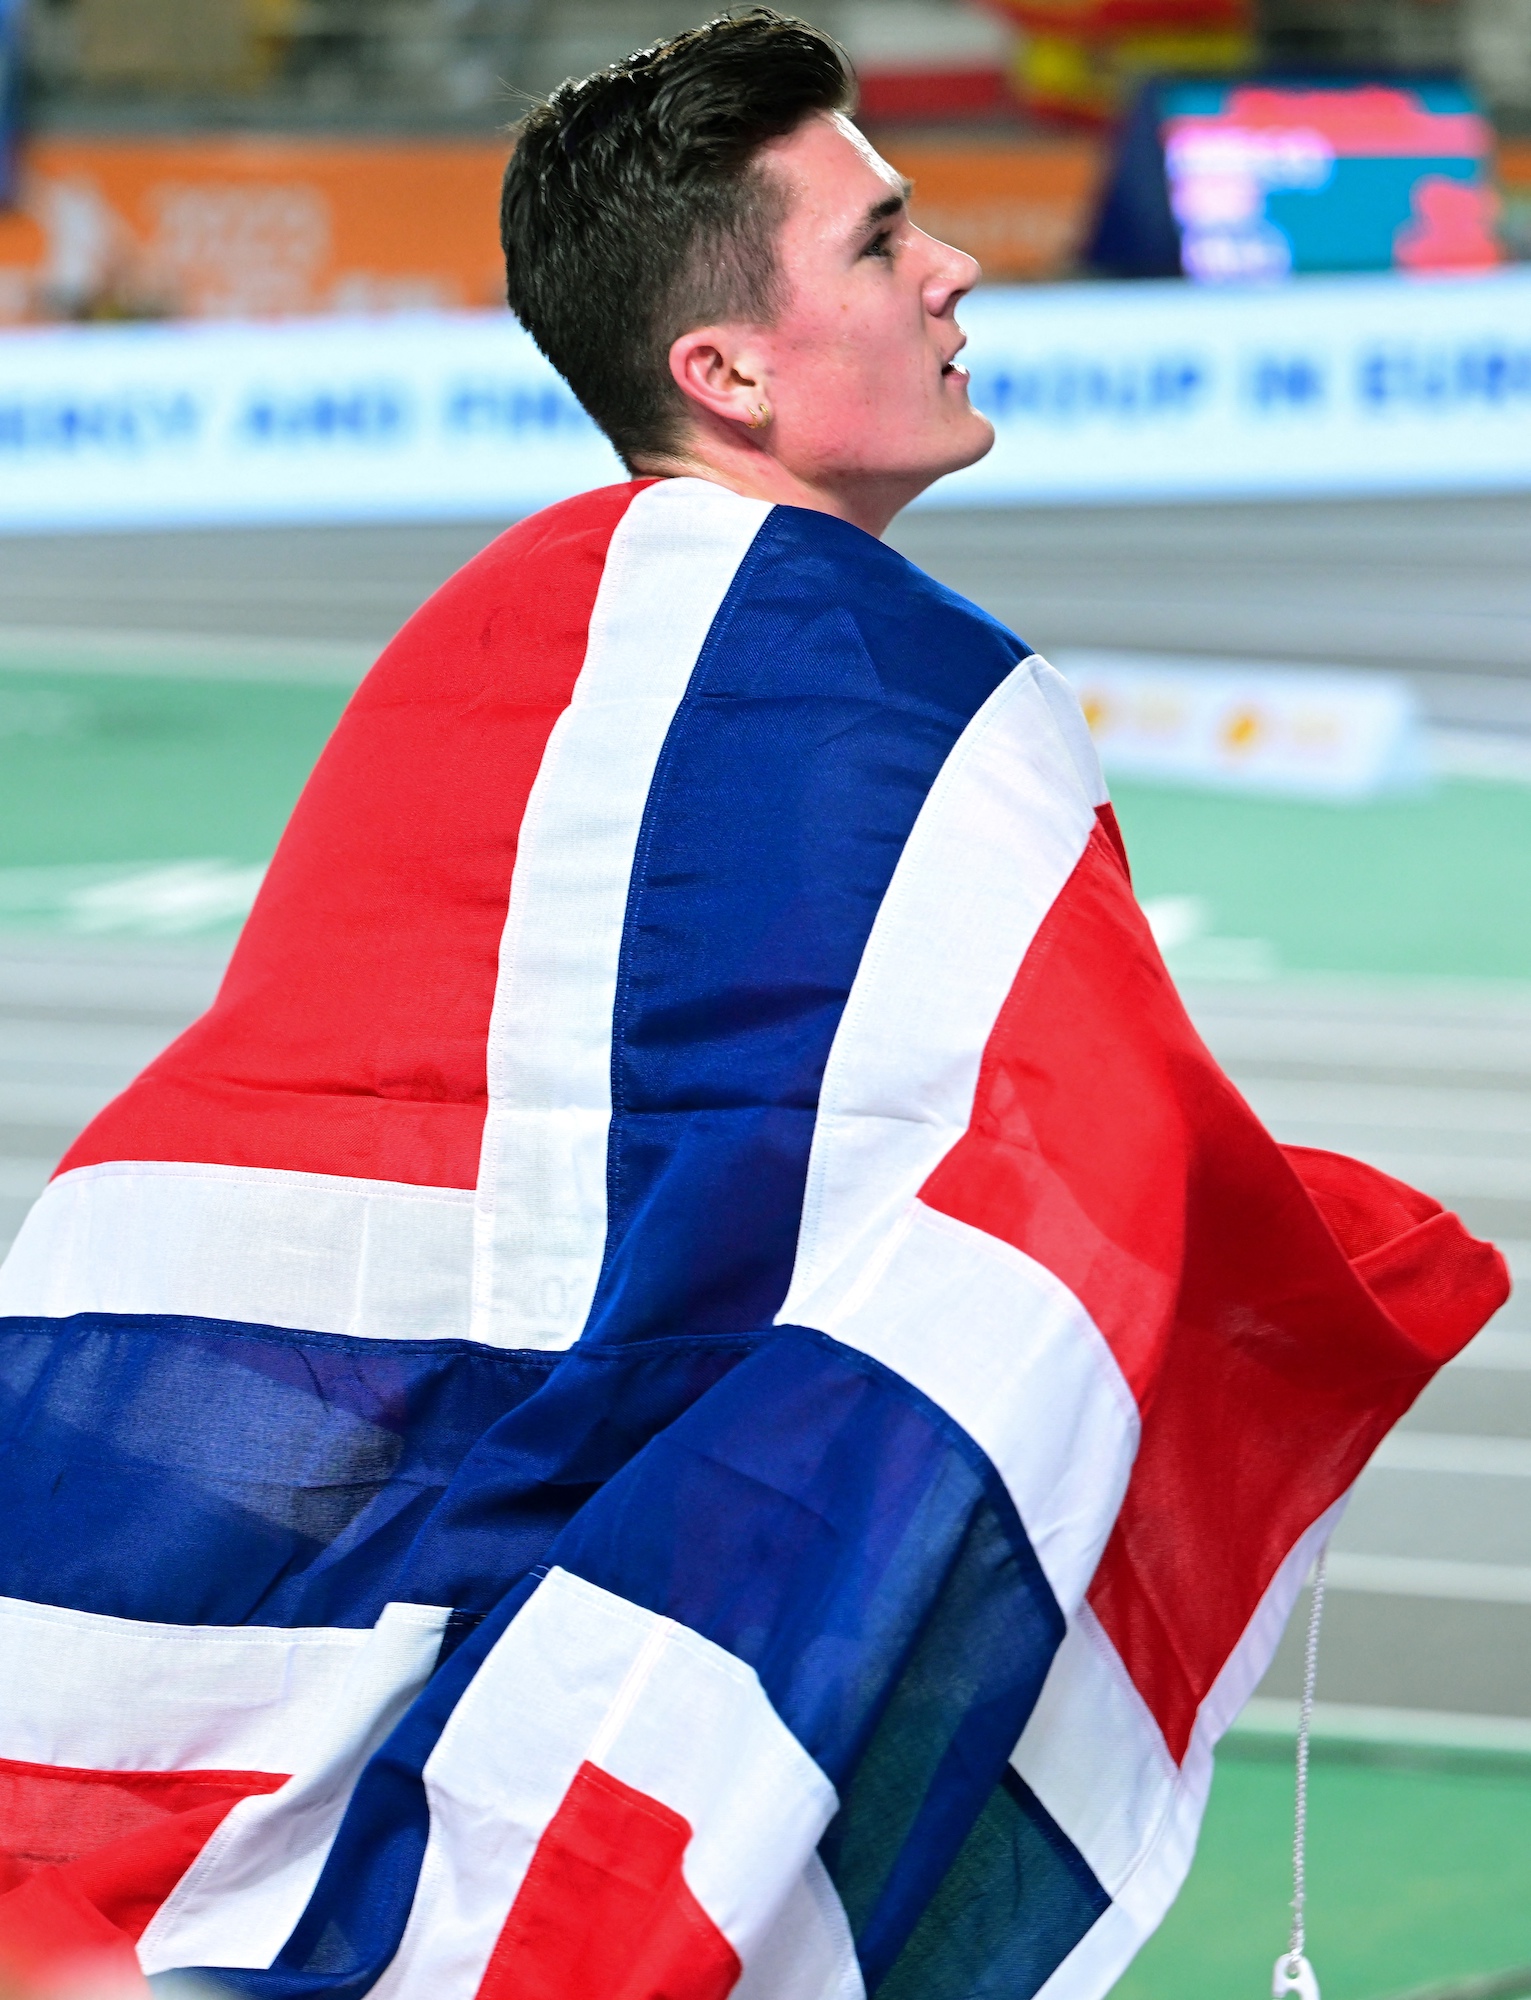 Norway's Jakob Ingebrigtsen celebrates after victory in the men's 3000m final during The European Indoor Athletics Championships at The Atakoy Athletics Arena in Istanbul on March 5, 2023